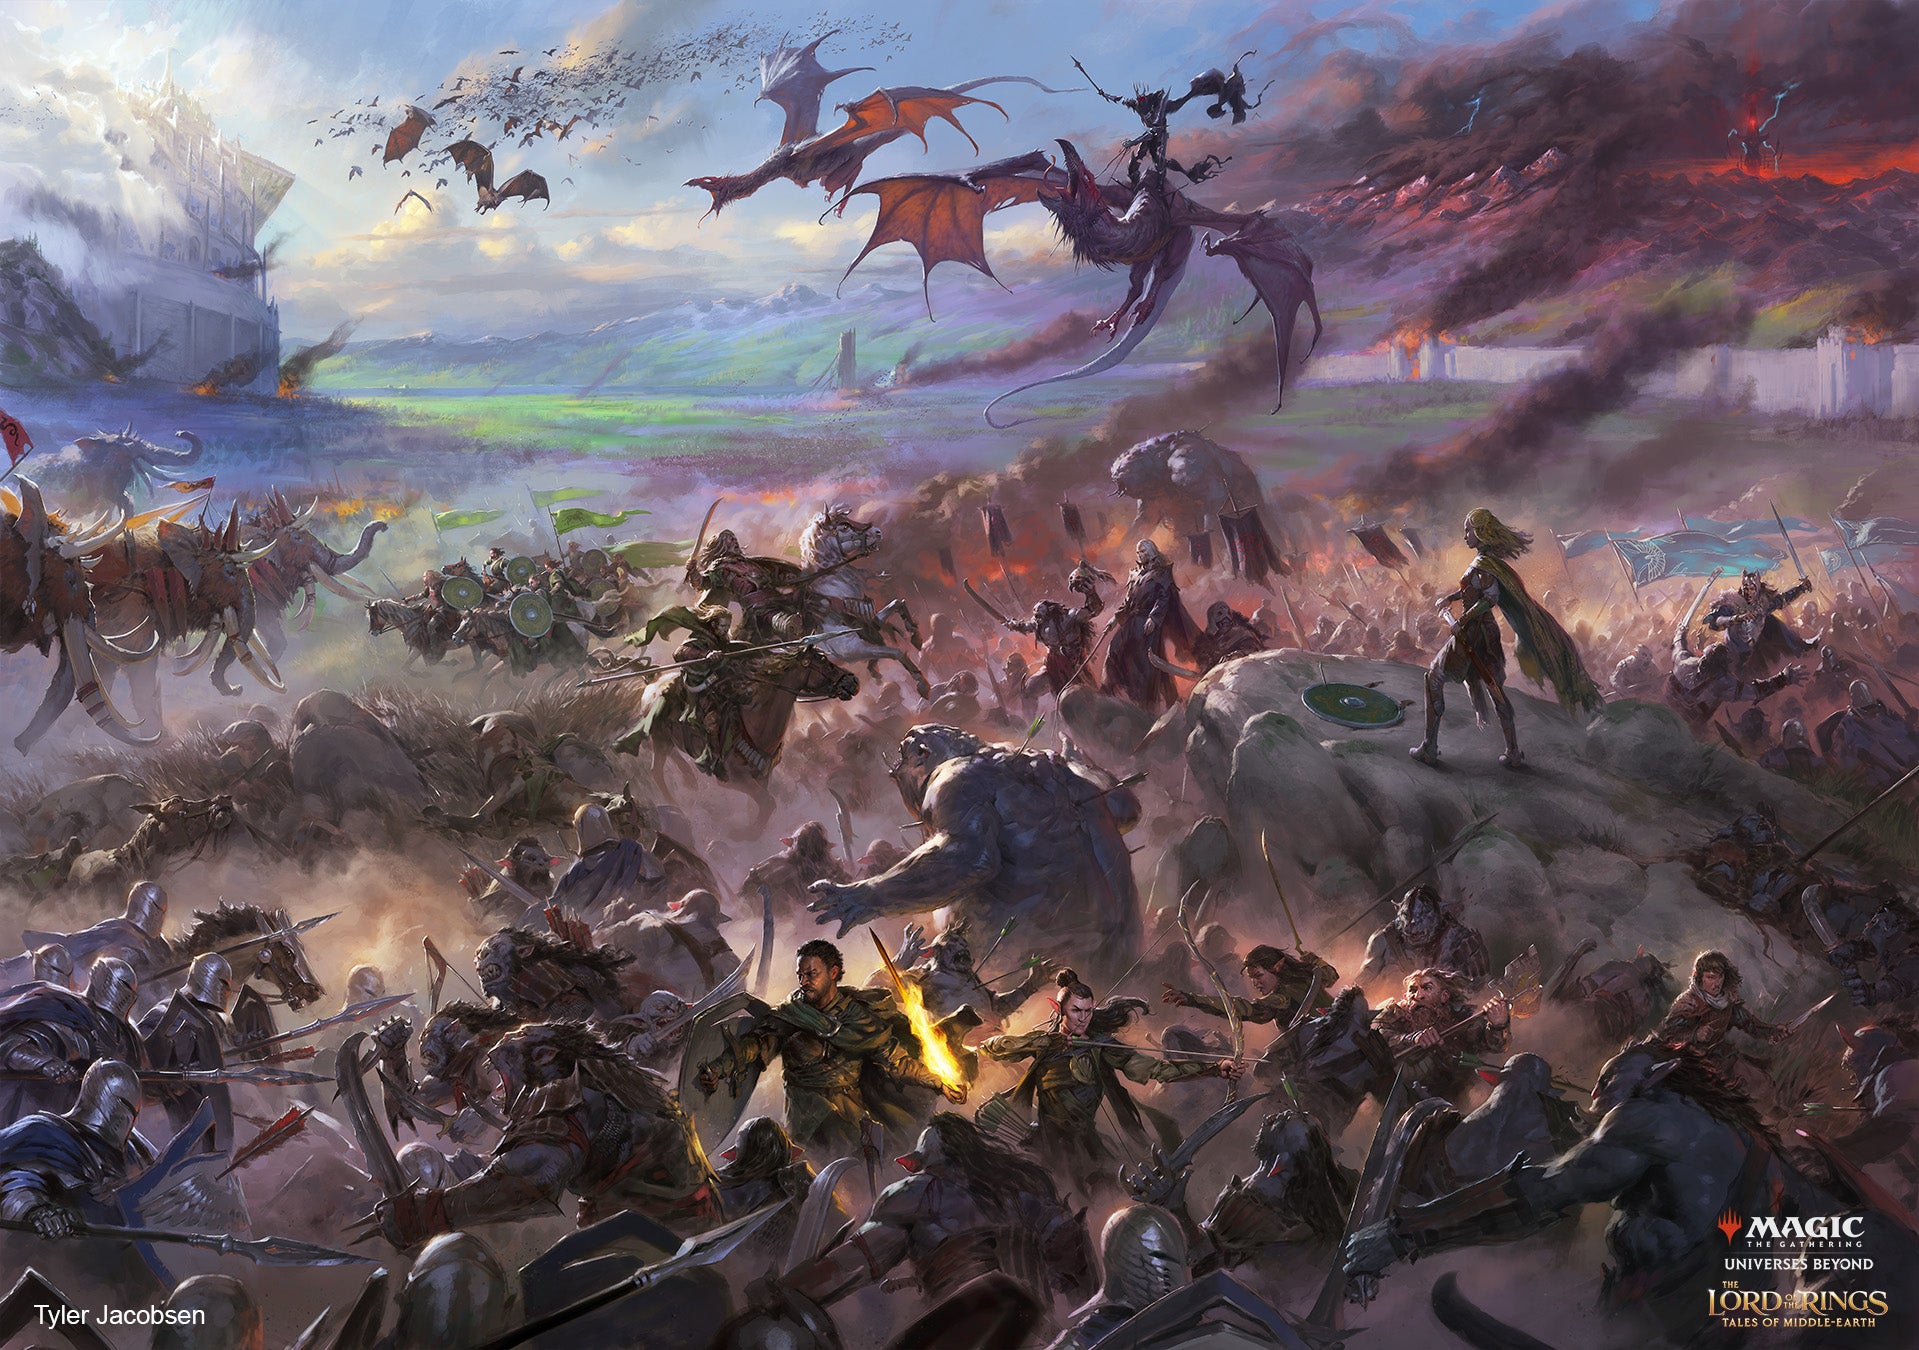 Image: Middle-Earth/Wizards of the Coast